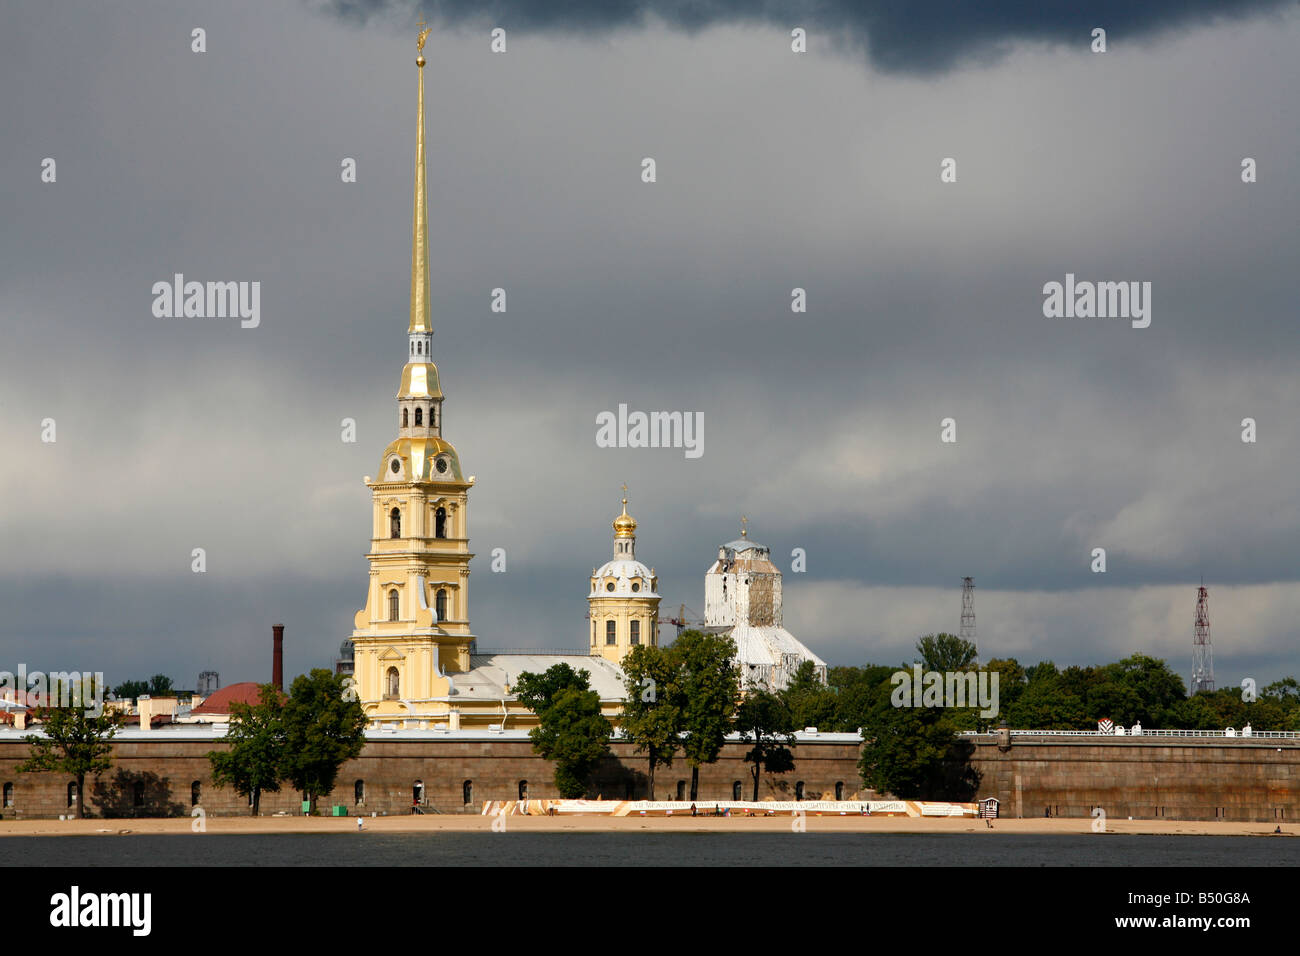 Aug 2008 - The Cathedral of SS Peter and Paul in the Peter and Paul Fortress St Petersburg Russia Stock Photo